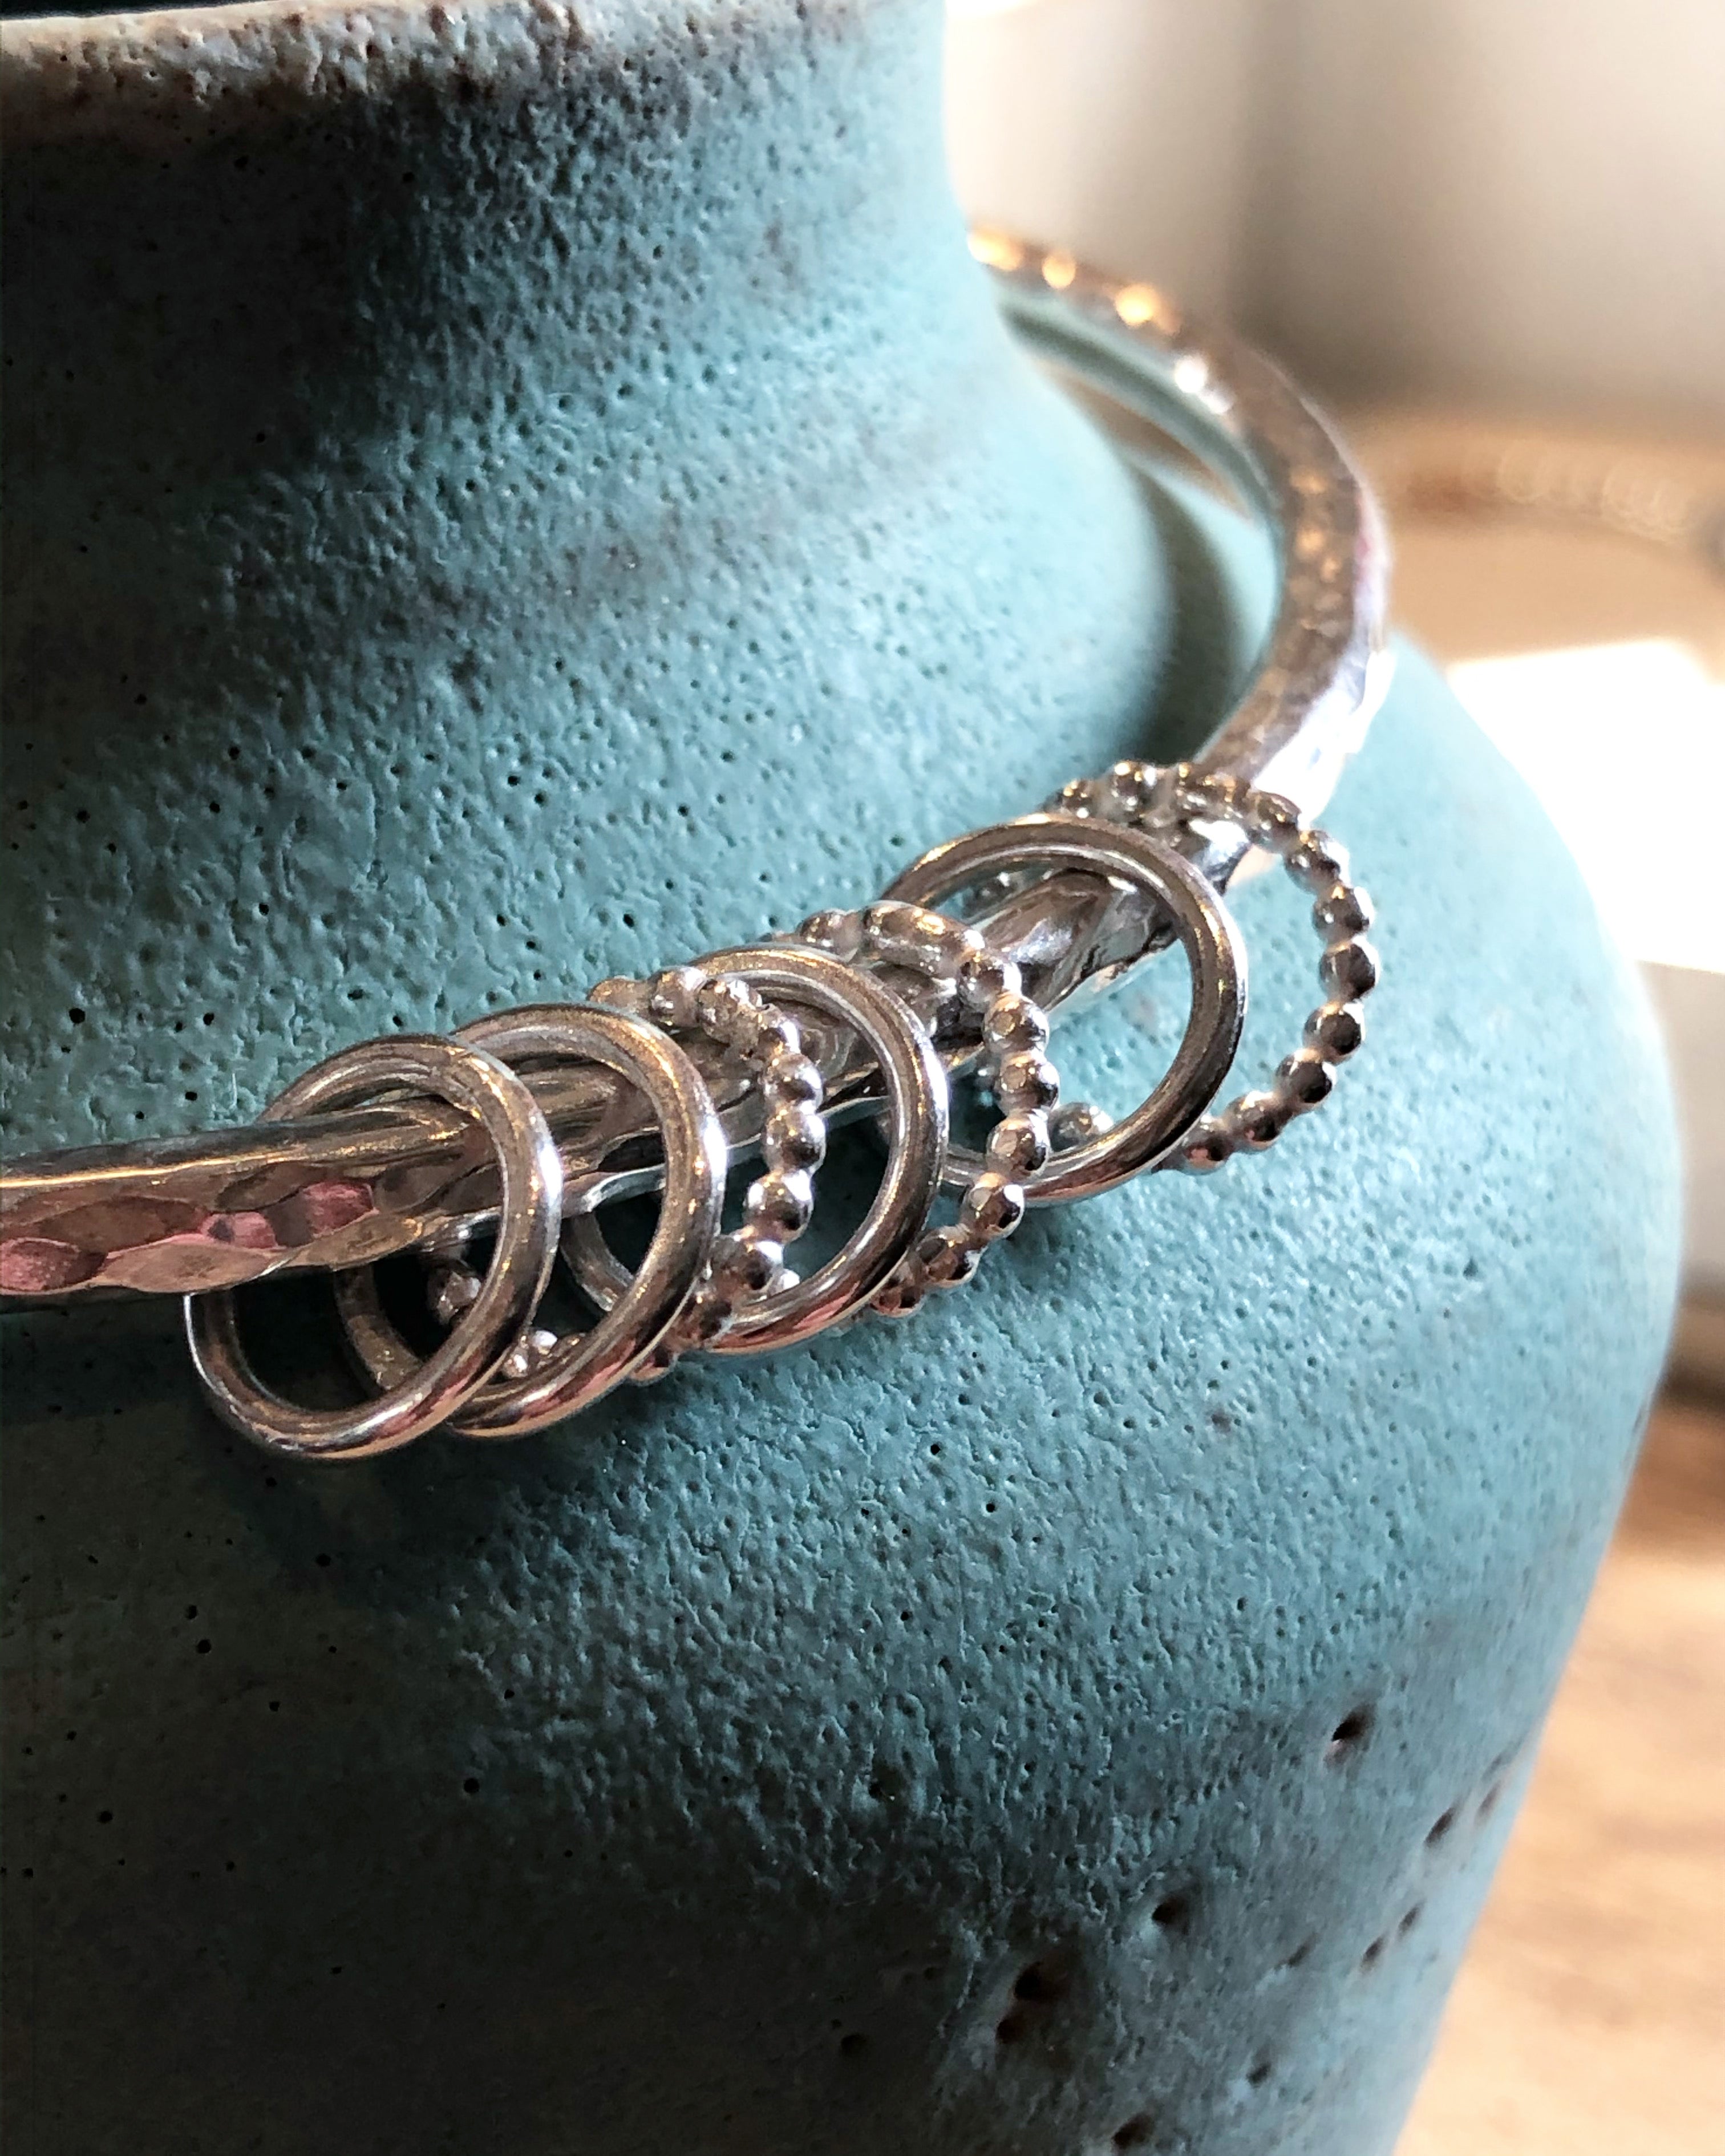 Patterned bangle with loose rings